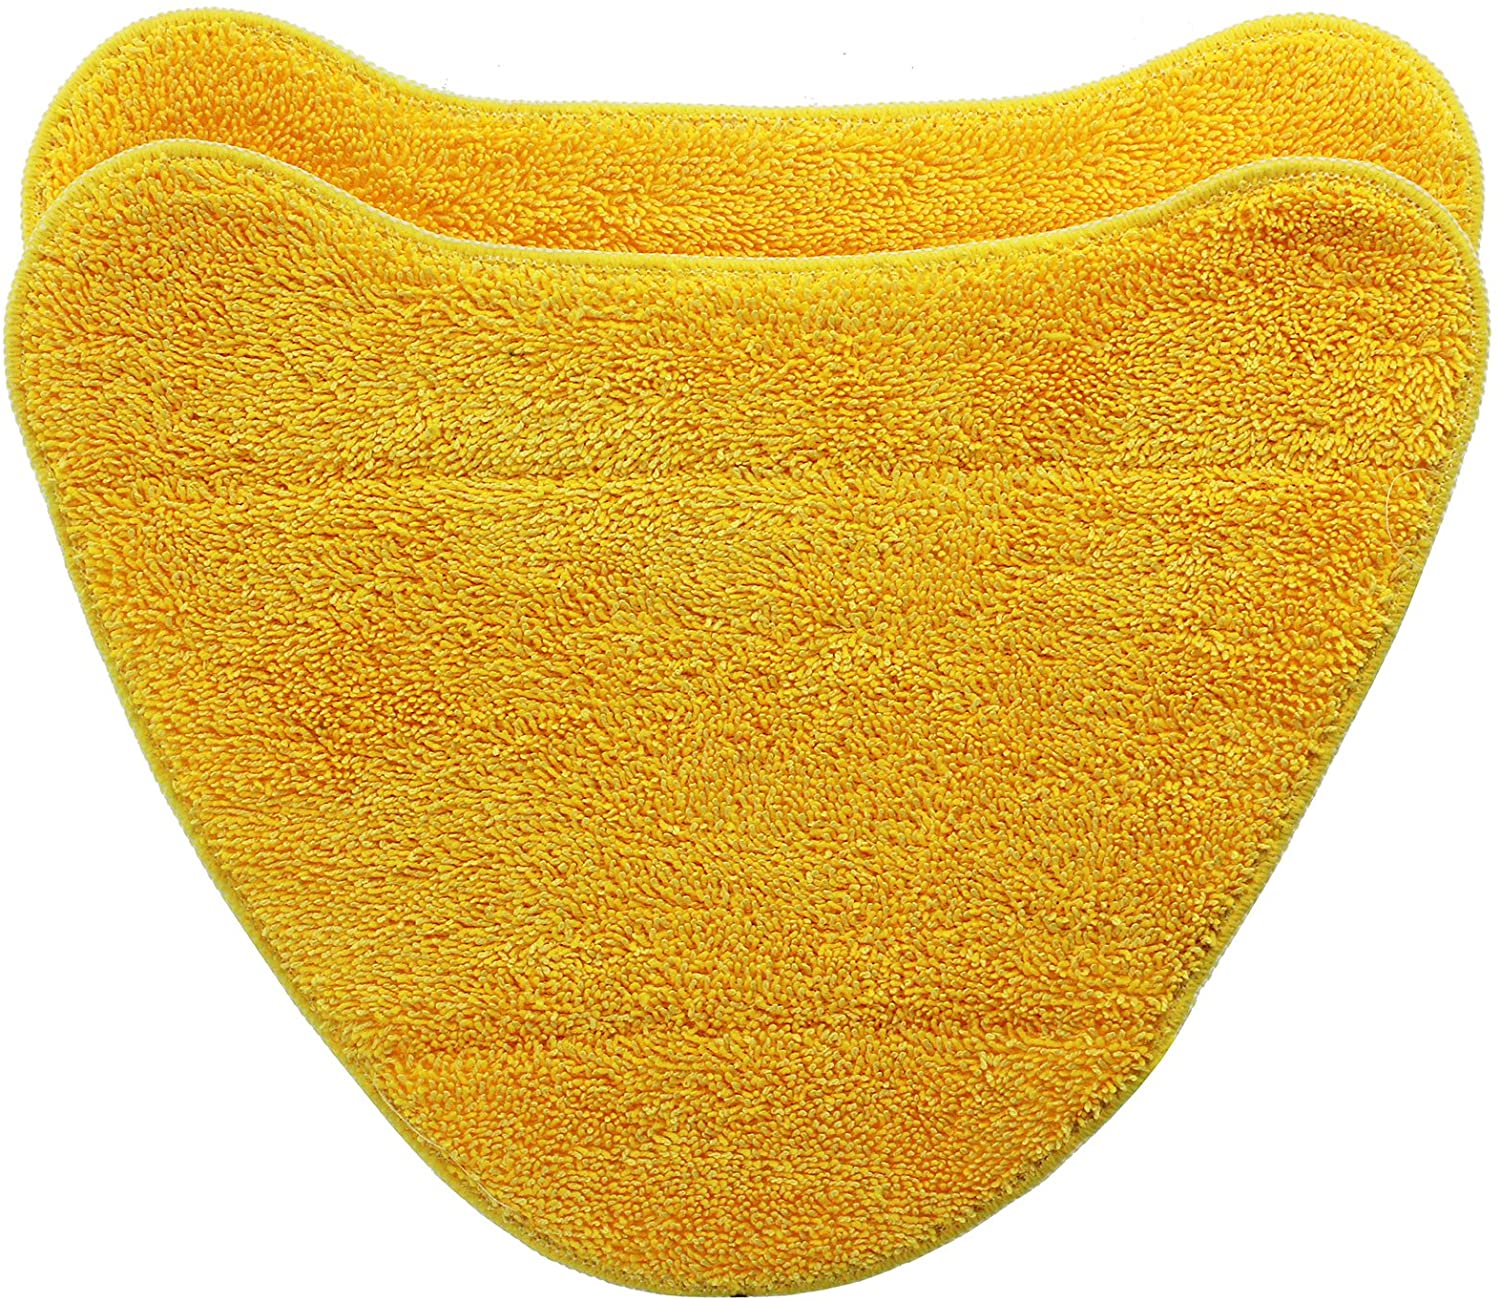 Cover + Scrub Pads Set for Vax Steam Cleaner Mop (Pack of 12 + 2 x 500ml Detergents)